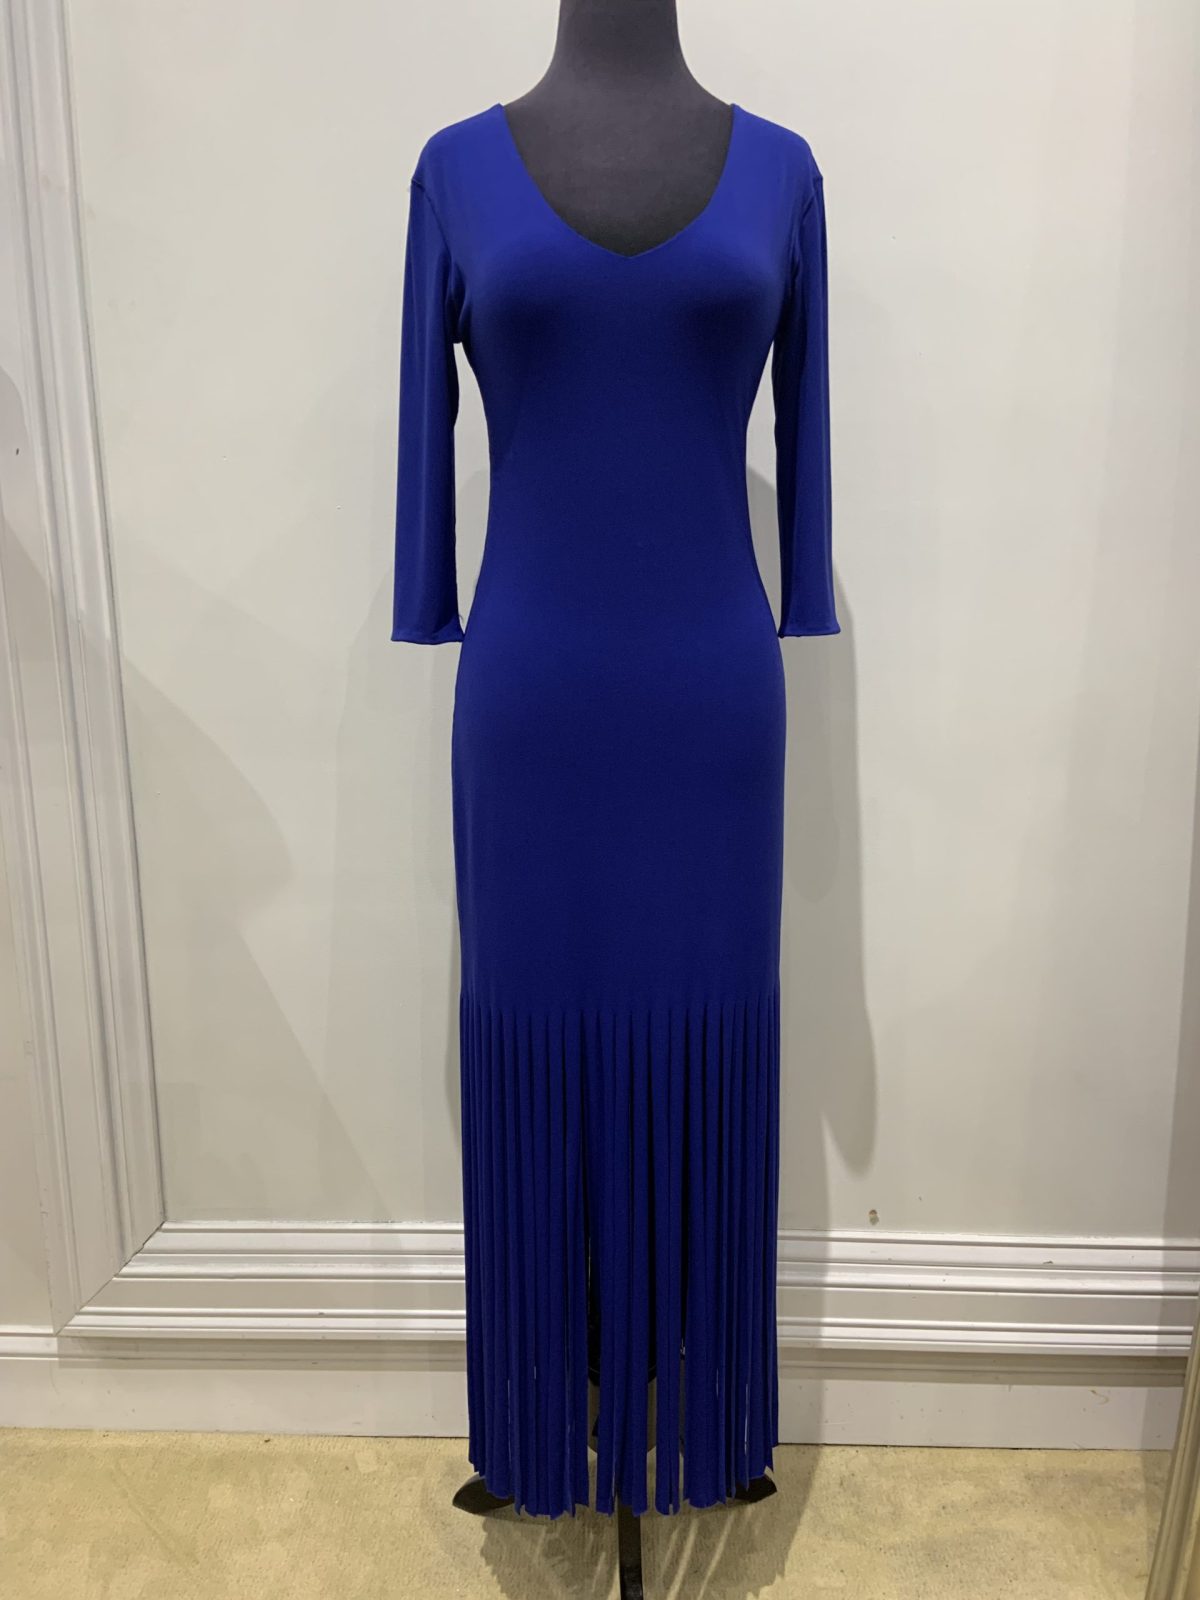 Eva Varro D12751D Royal Blue 3/4 Fringe Dress with 3/4 Length Sleeves | Ooh Ooh Shoes women's clothing and shoe boutique located in Naples and Mashpee